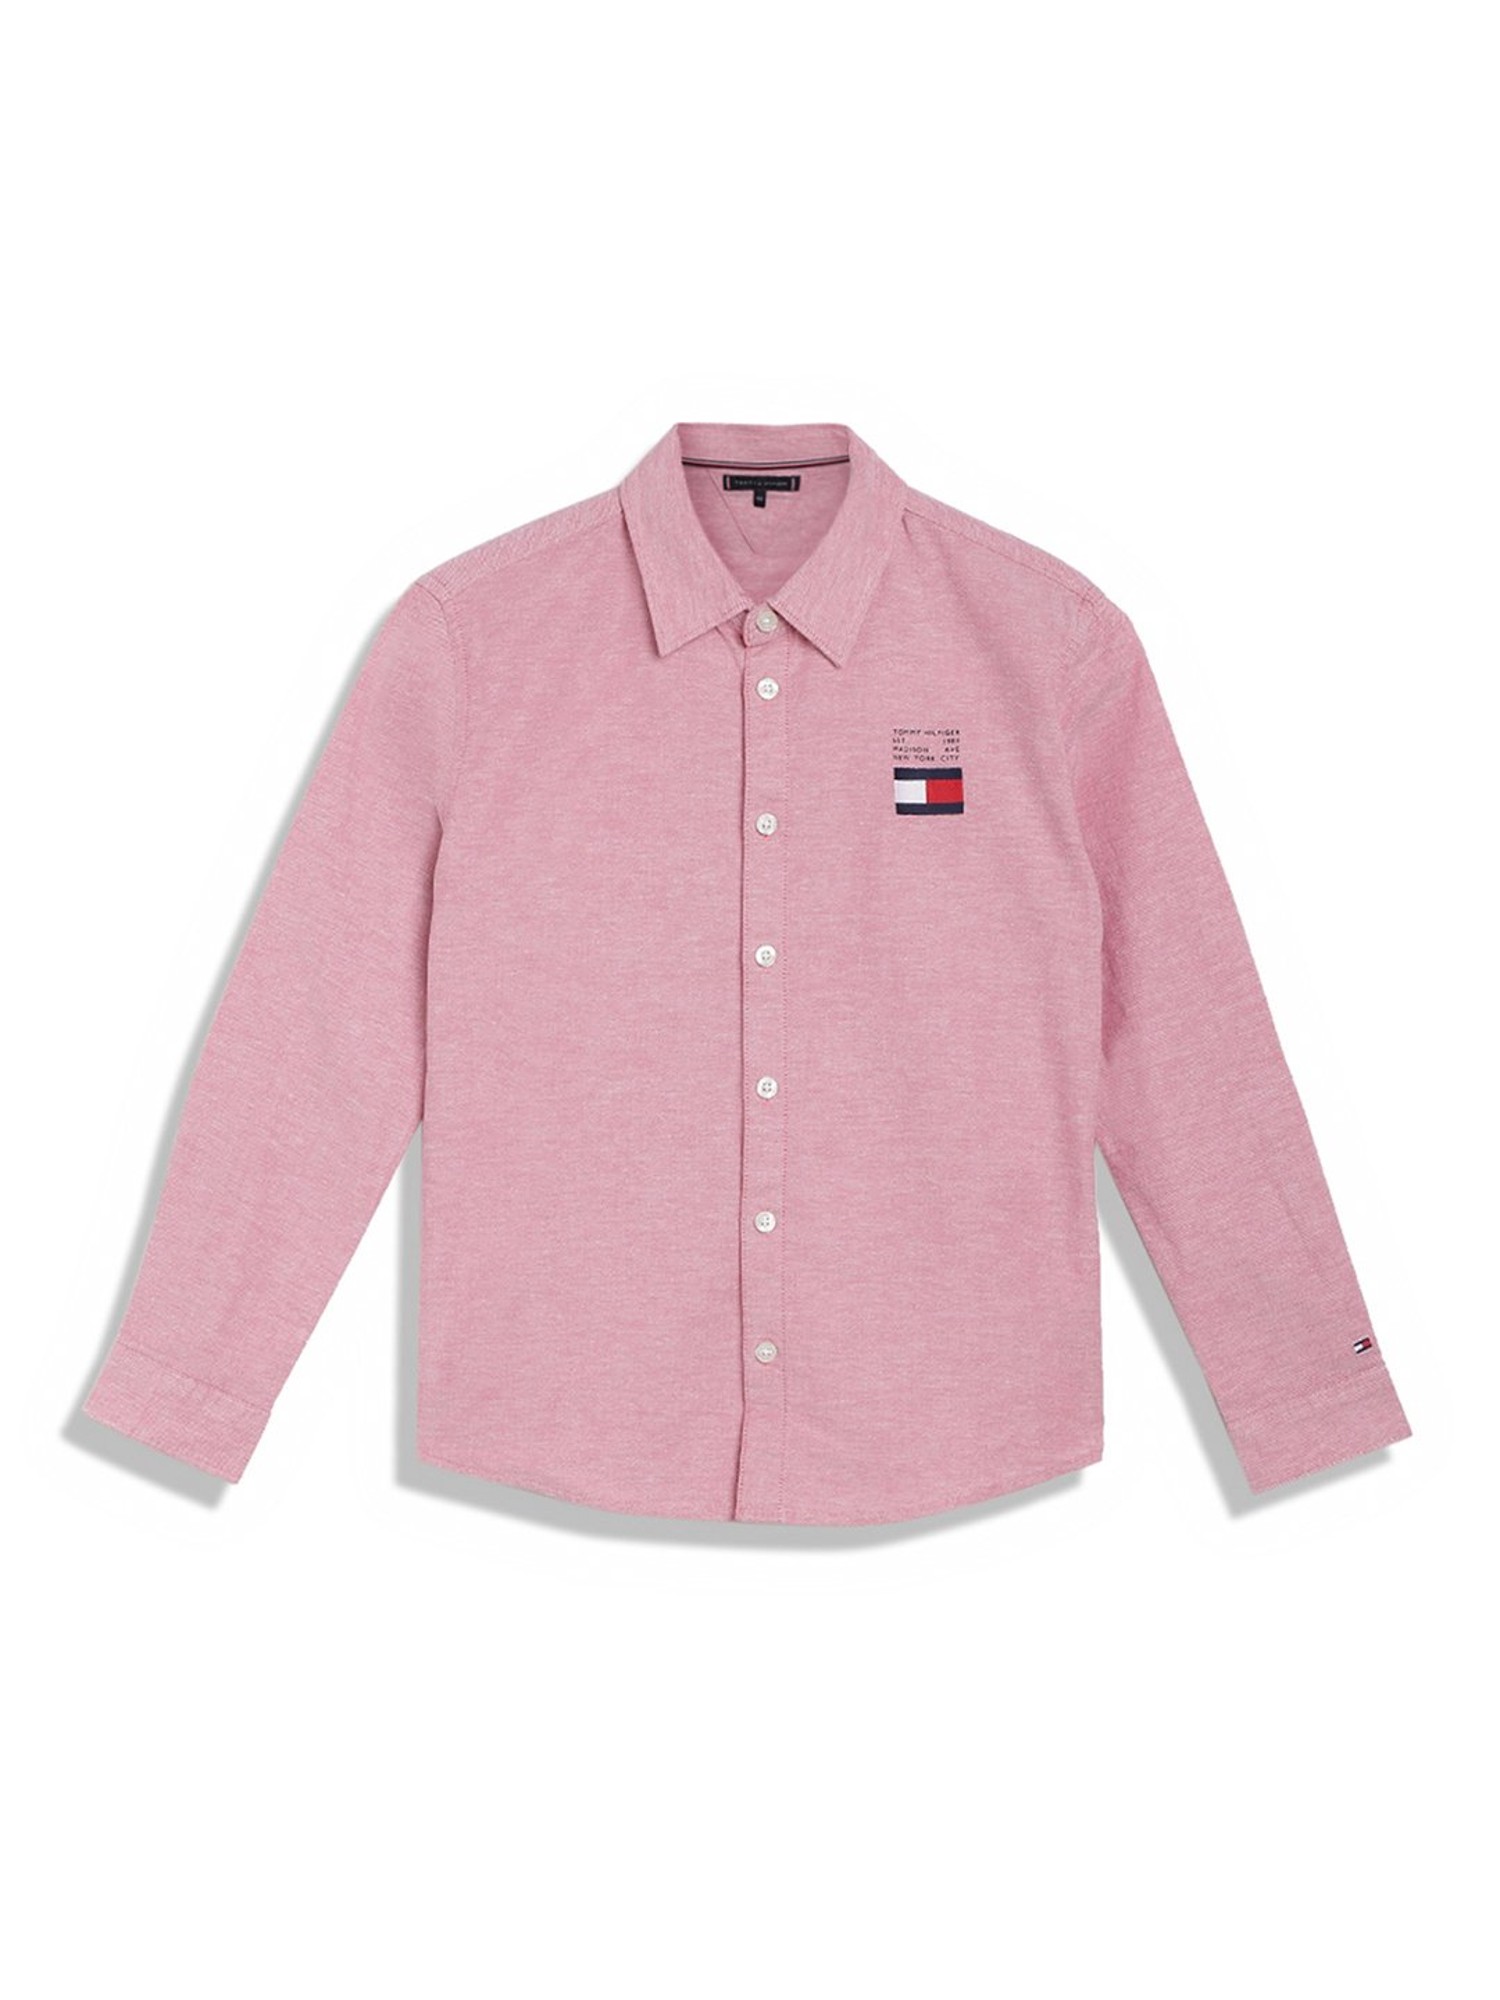 Tommy Hilfiger Kids Pink Solid Full Sleeves Shirt